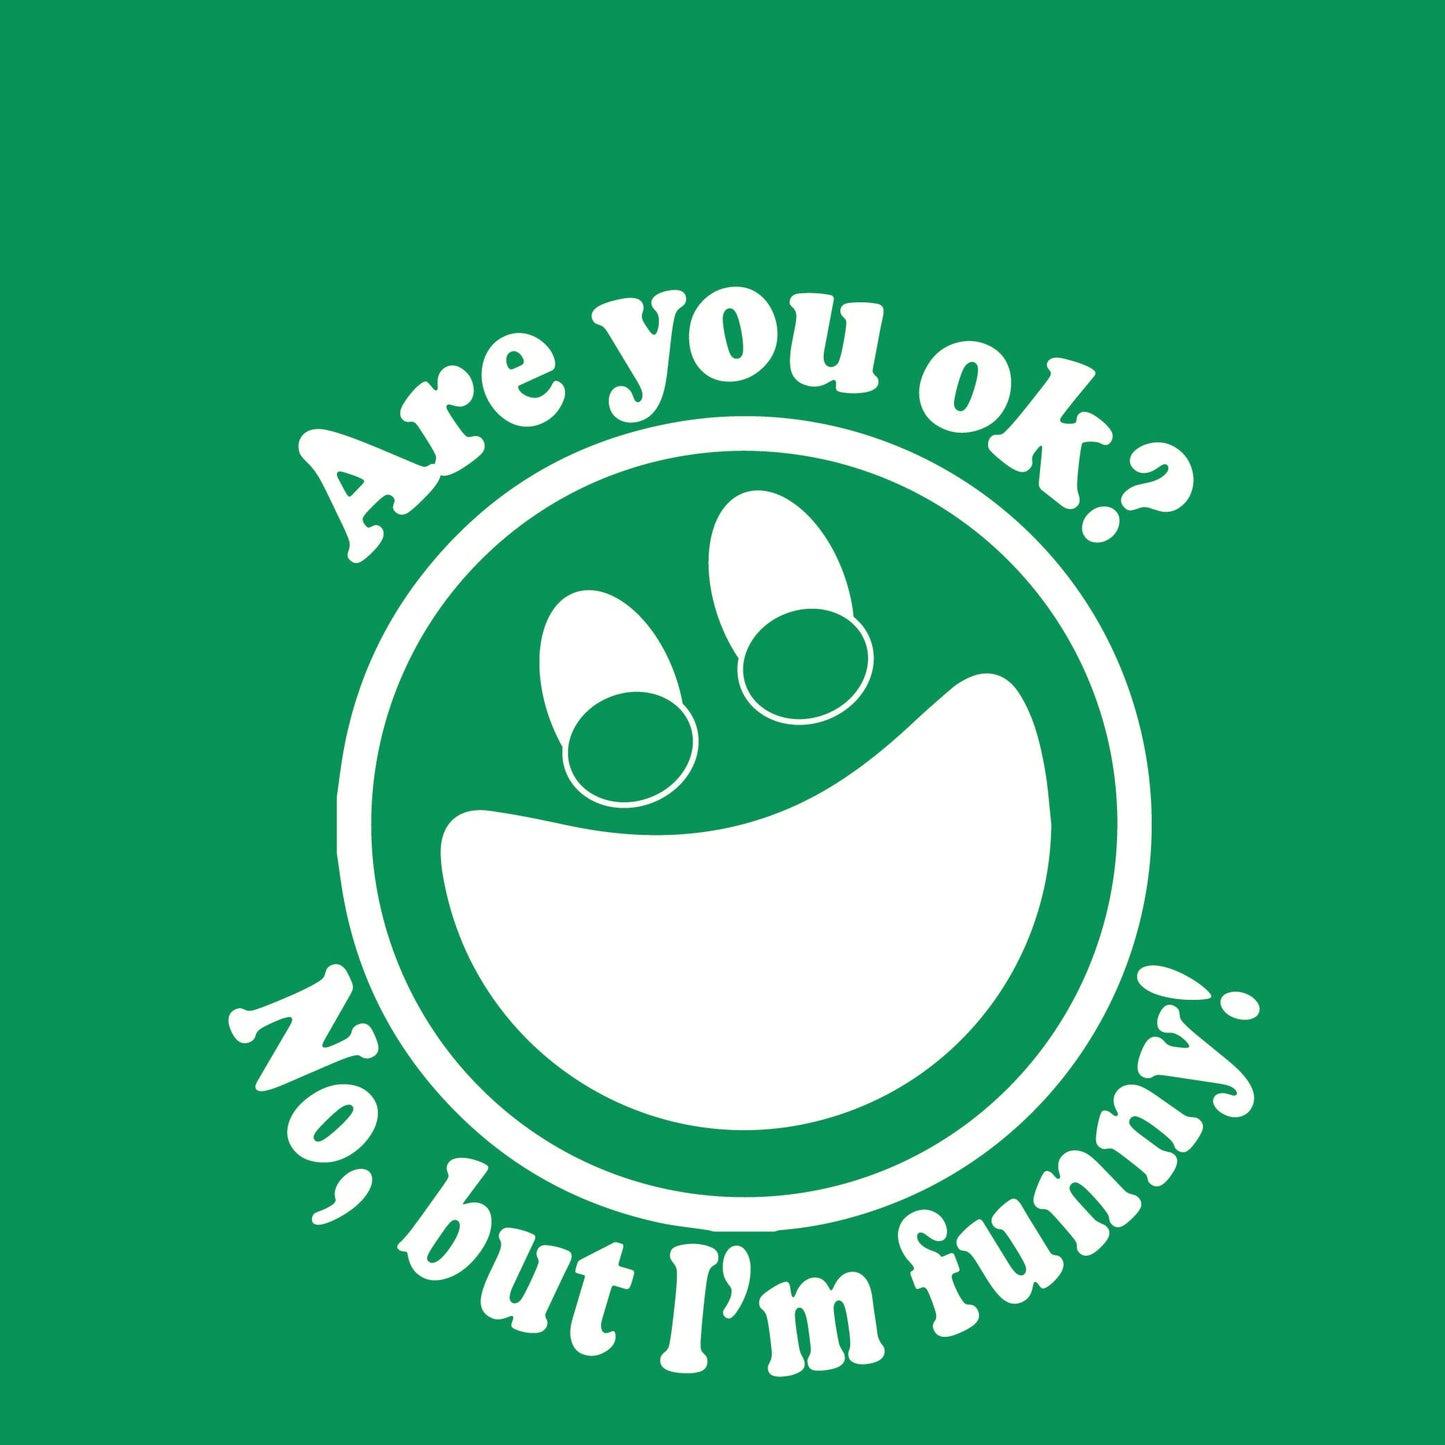 Are you ok? No, but I'm funny!